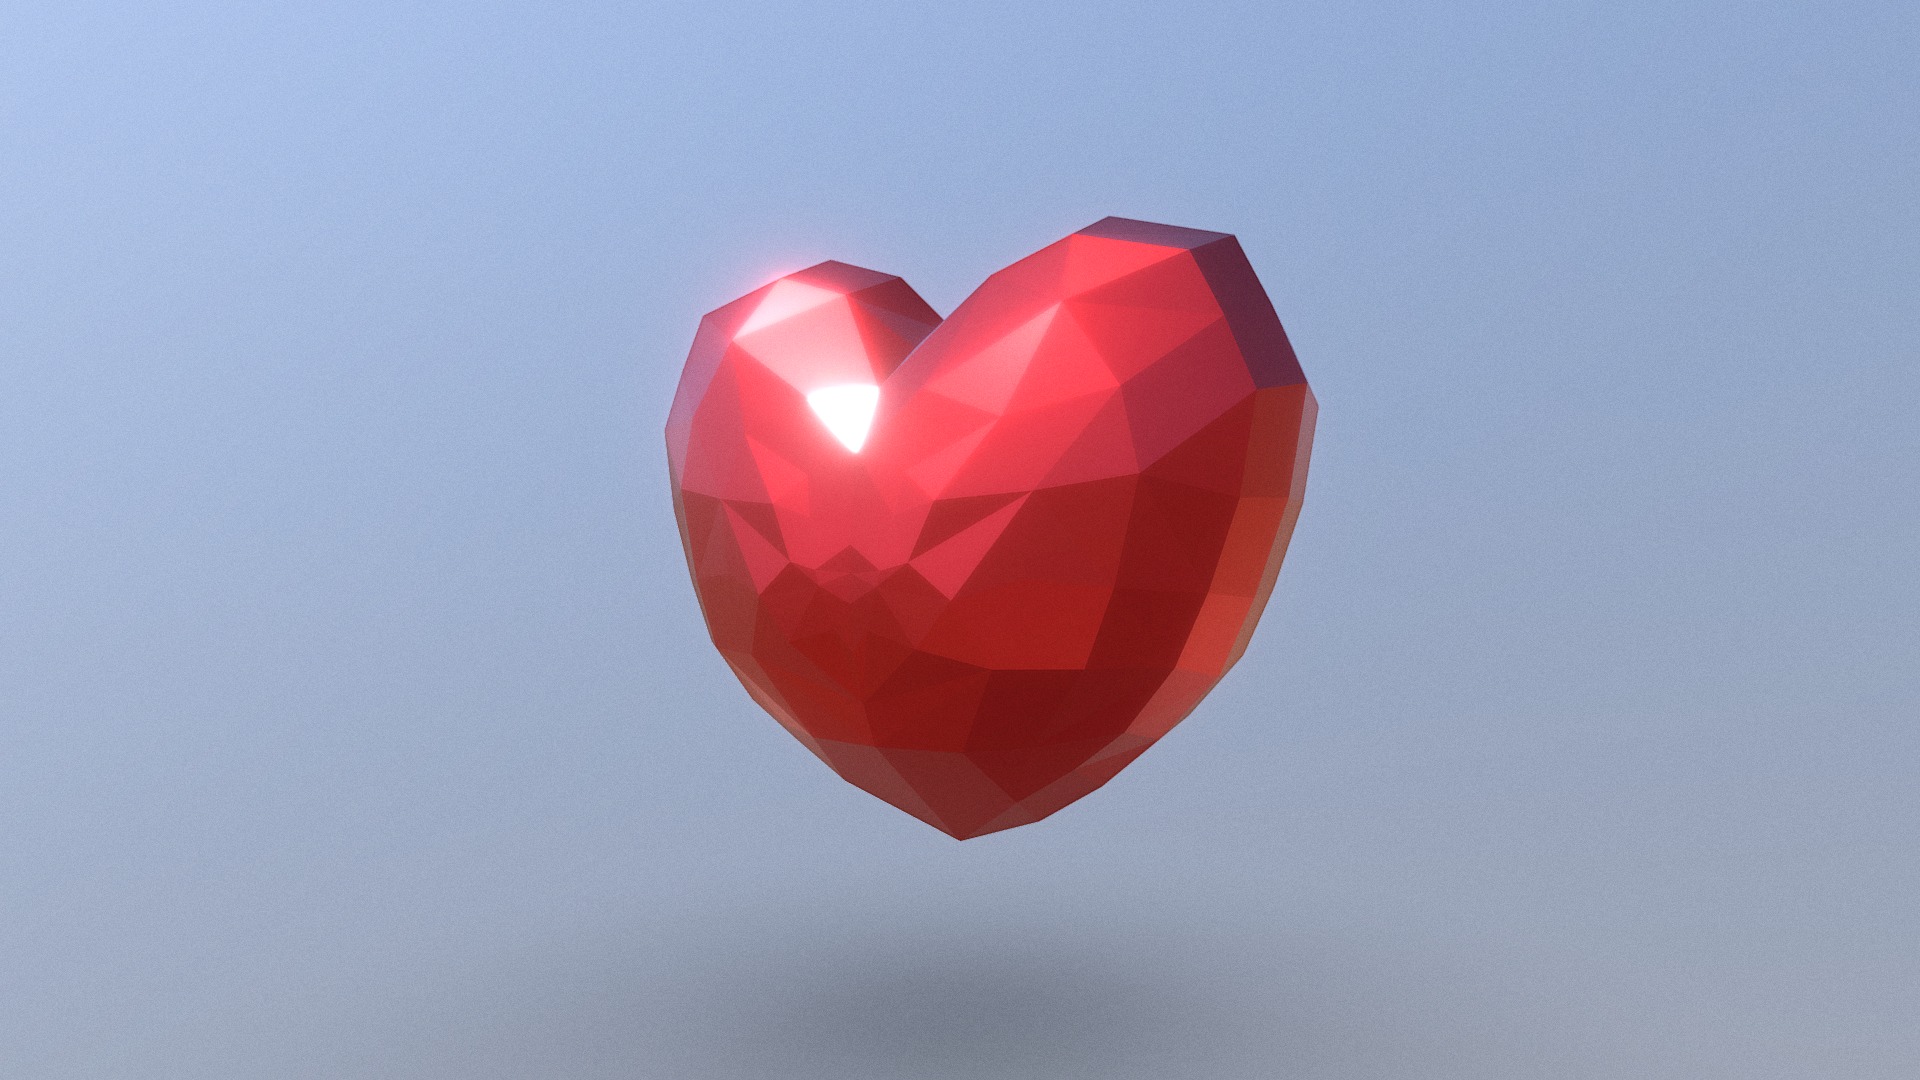 I started a series of “Let’s make one low poly asset before bed”. Follow me on instagram to receive daily notifications of free low-poly assets: instagram.com/v_freshlybaked/ - Heart - Download Free 3D model by Diego T. Yamaguchi (@freshlybaked) 3d model